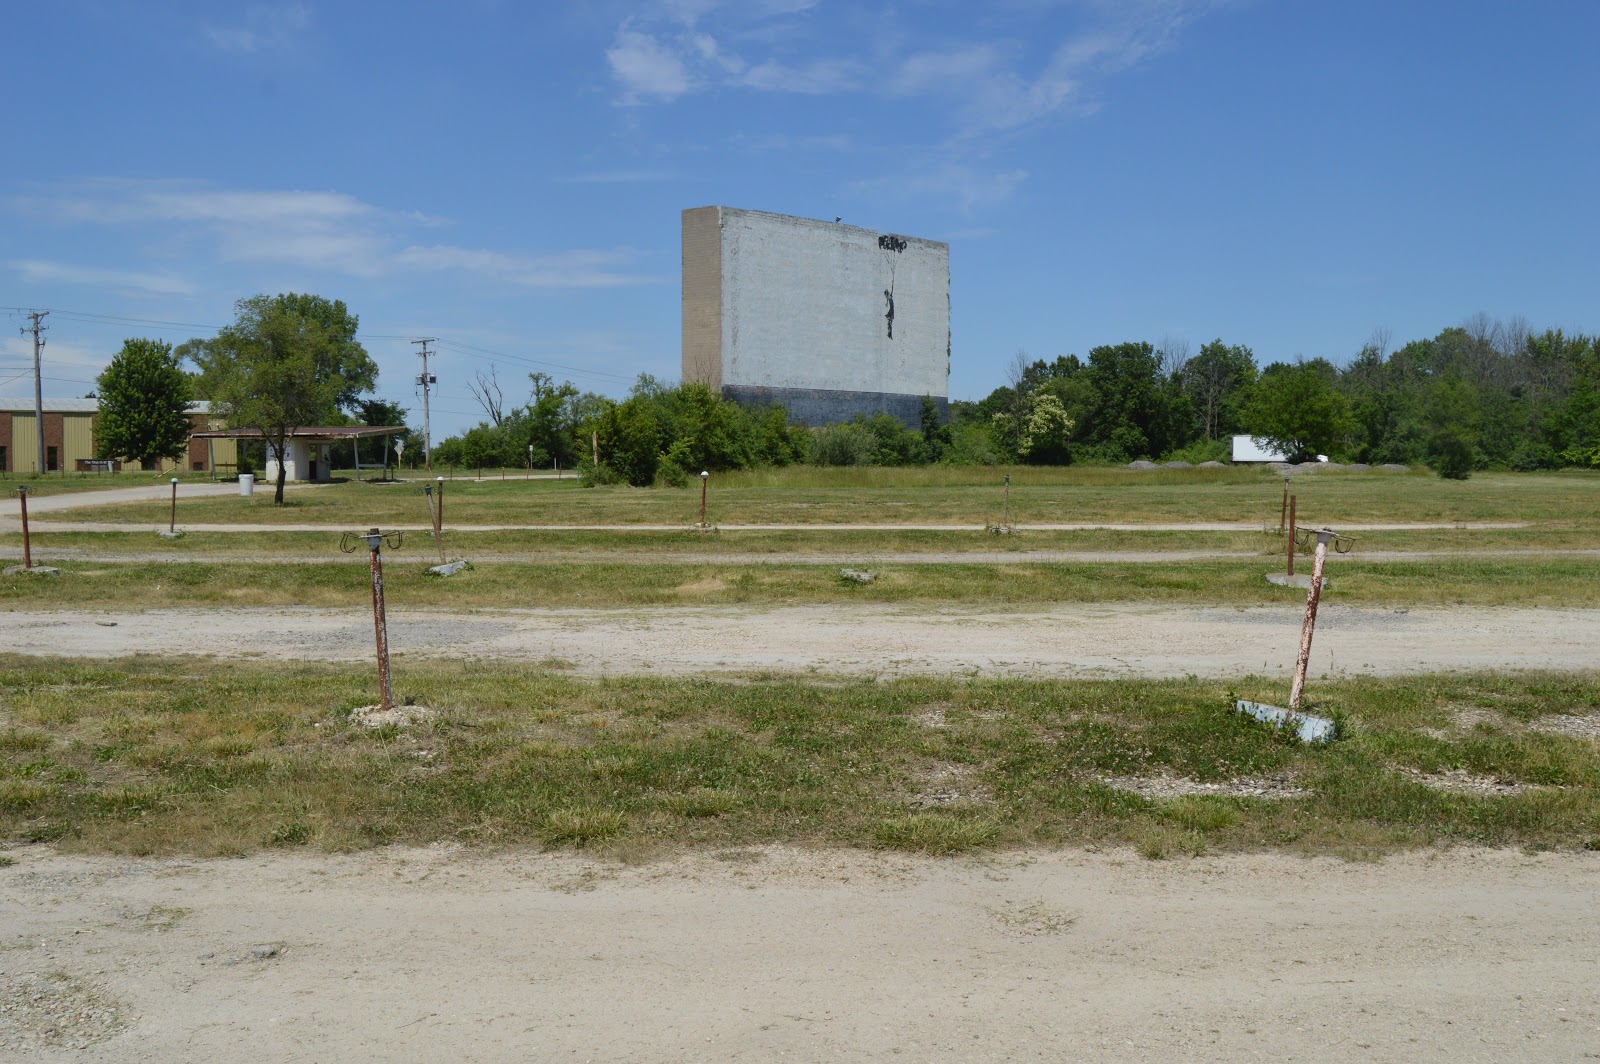 Towns and Nature: Joliet, IL: Hilltop Drive-In Movie Theater